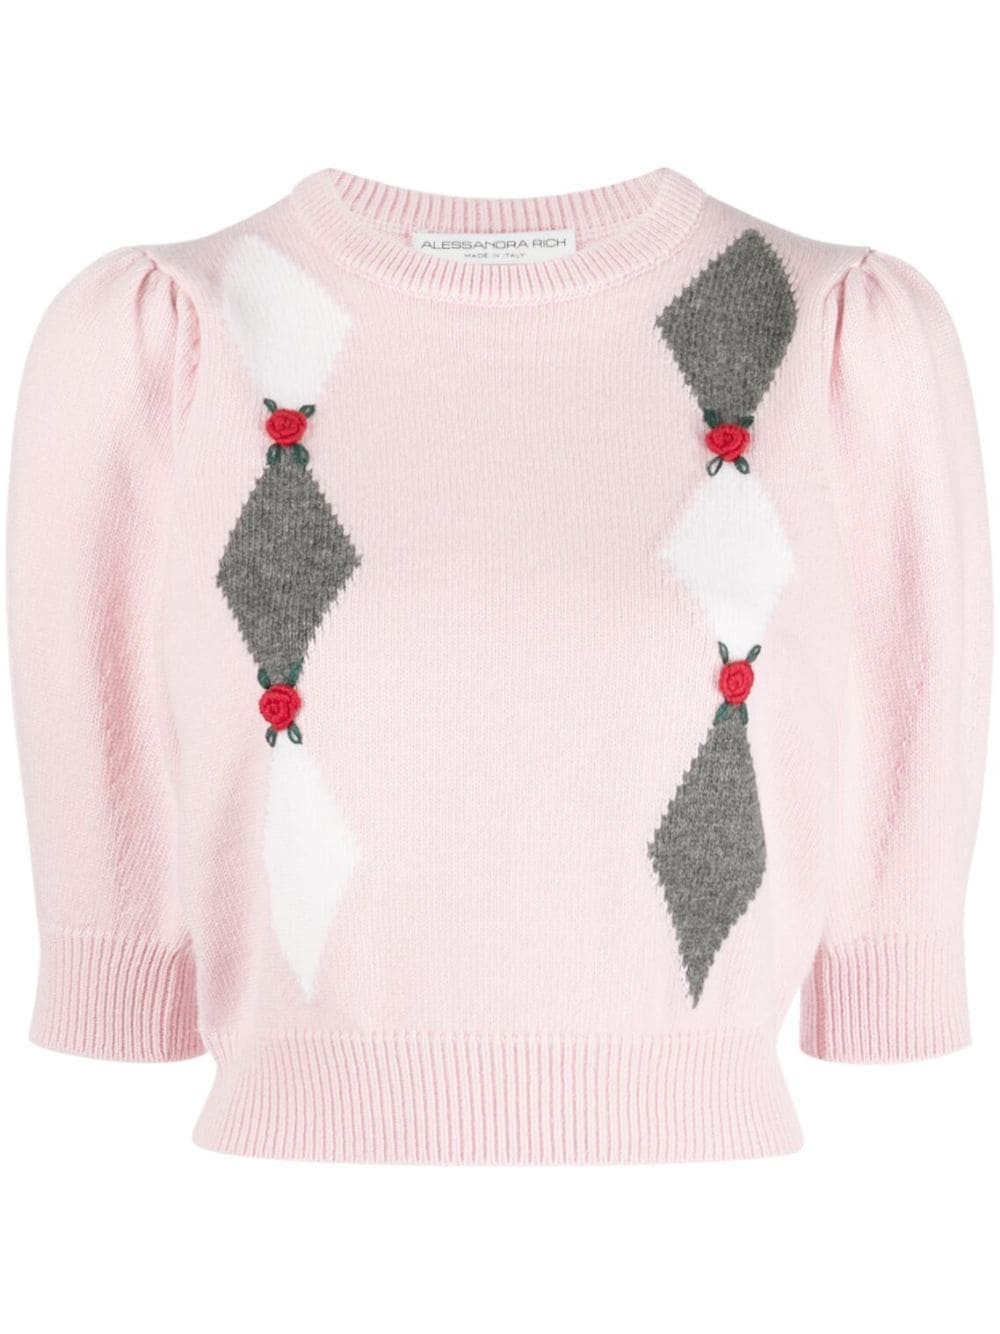 Alessandra Rich embroidered knit cropped jumper - Pink